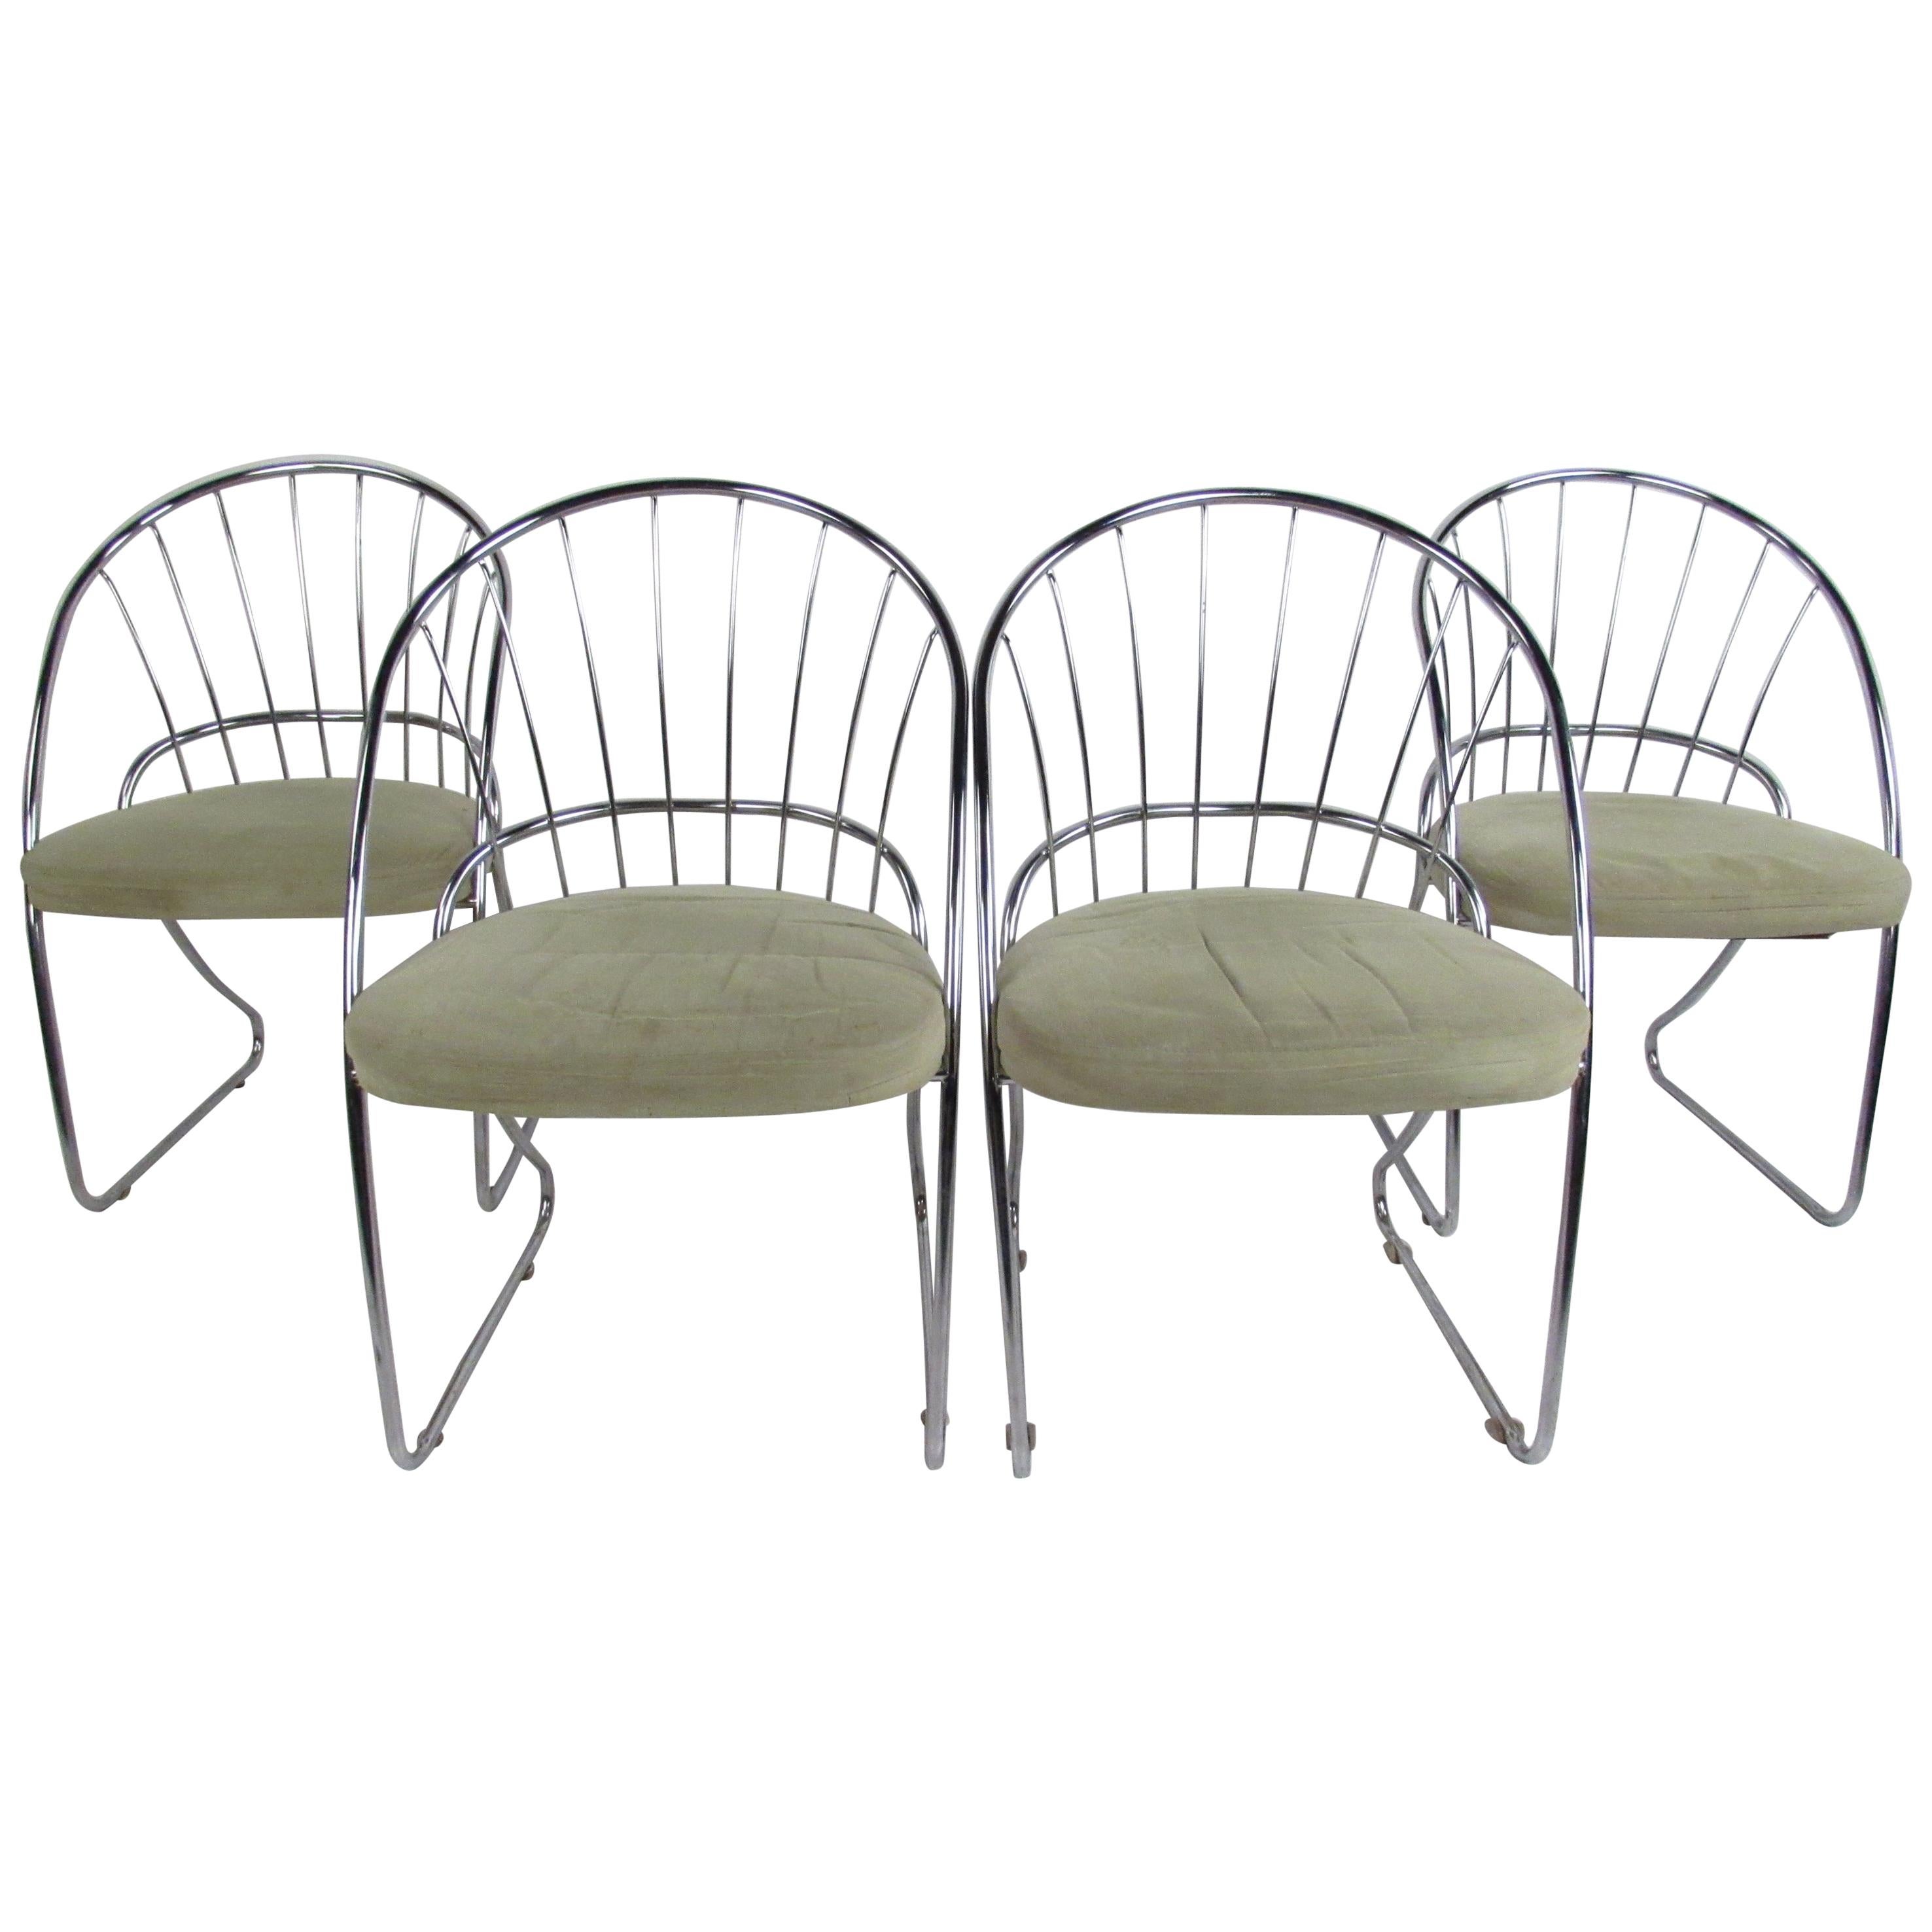 Four Mid-Century Modern Dining Chairs by Daystrom Furniture Co.